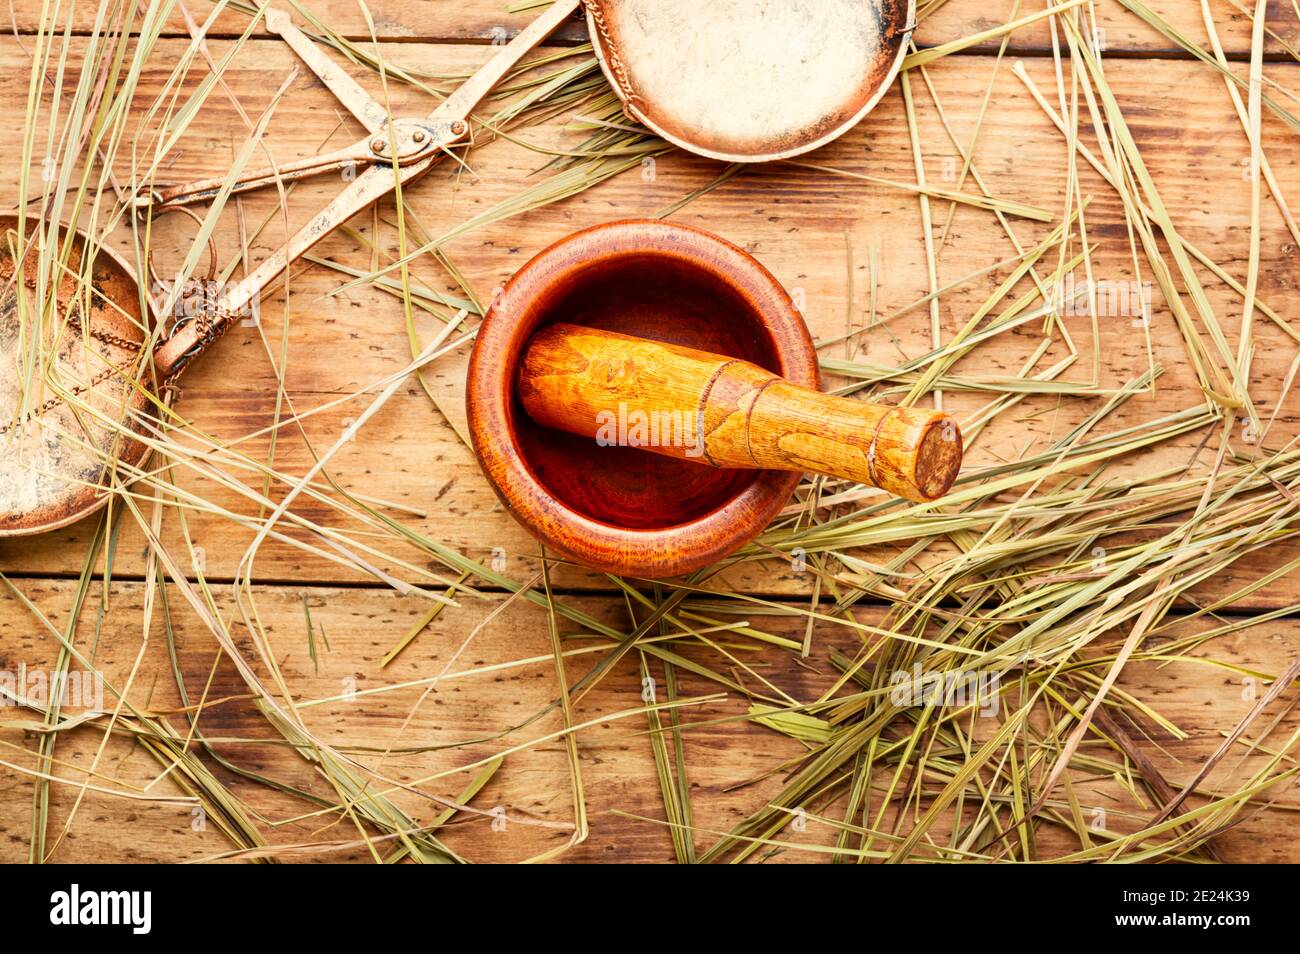 Mortar with medicinal herb sweetgrass or holy grass.Herbal medicine. Stock Photo